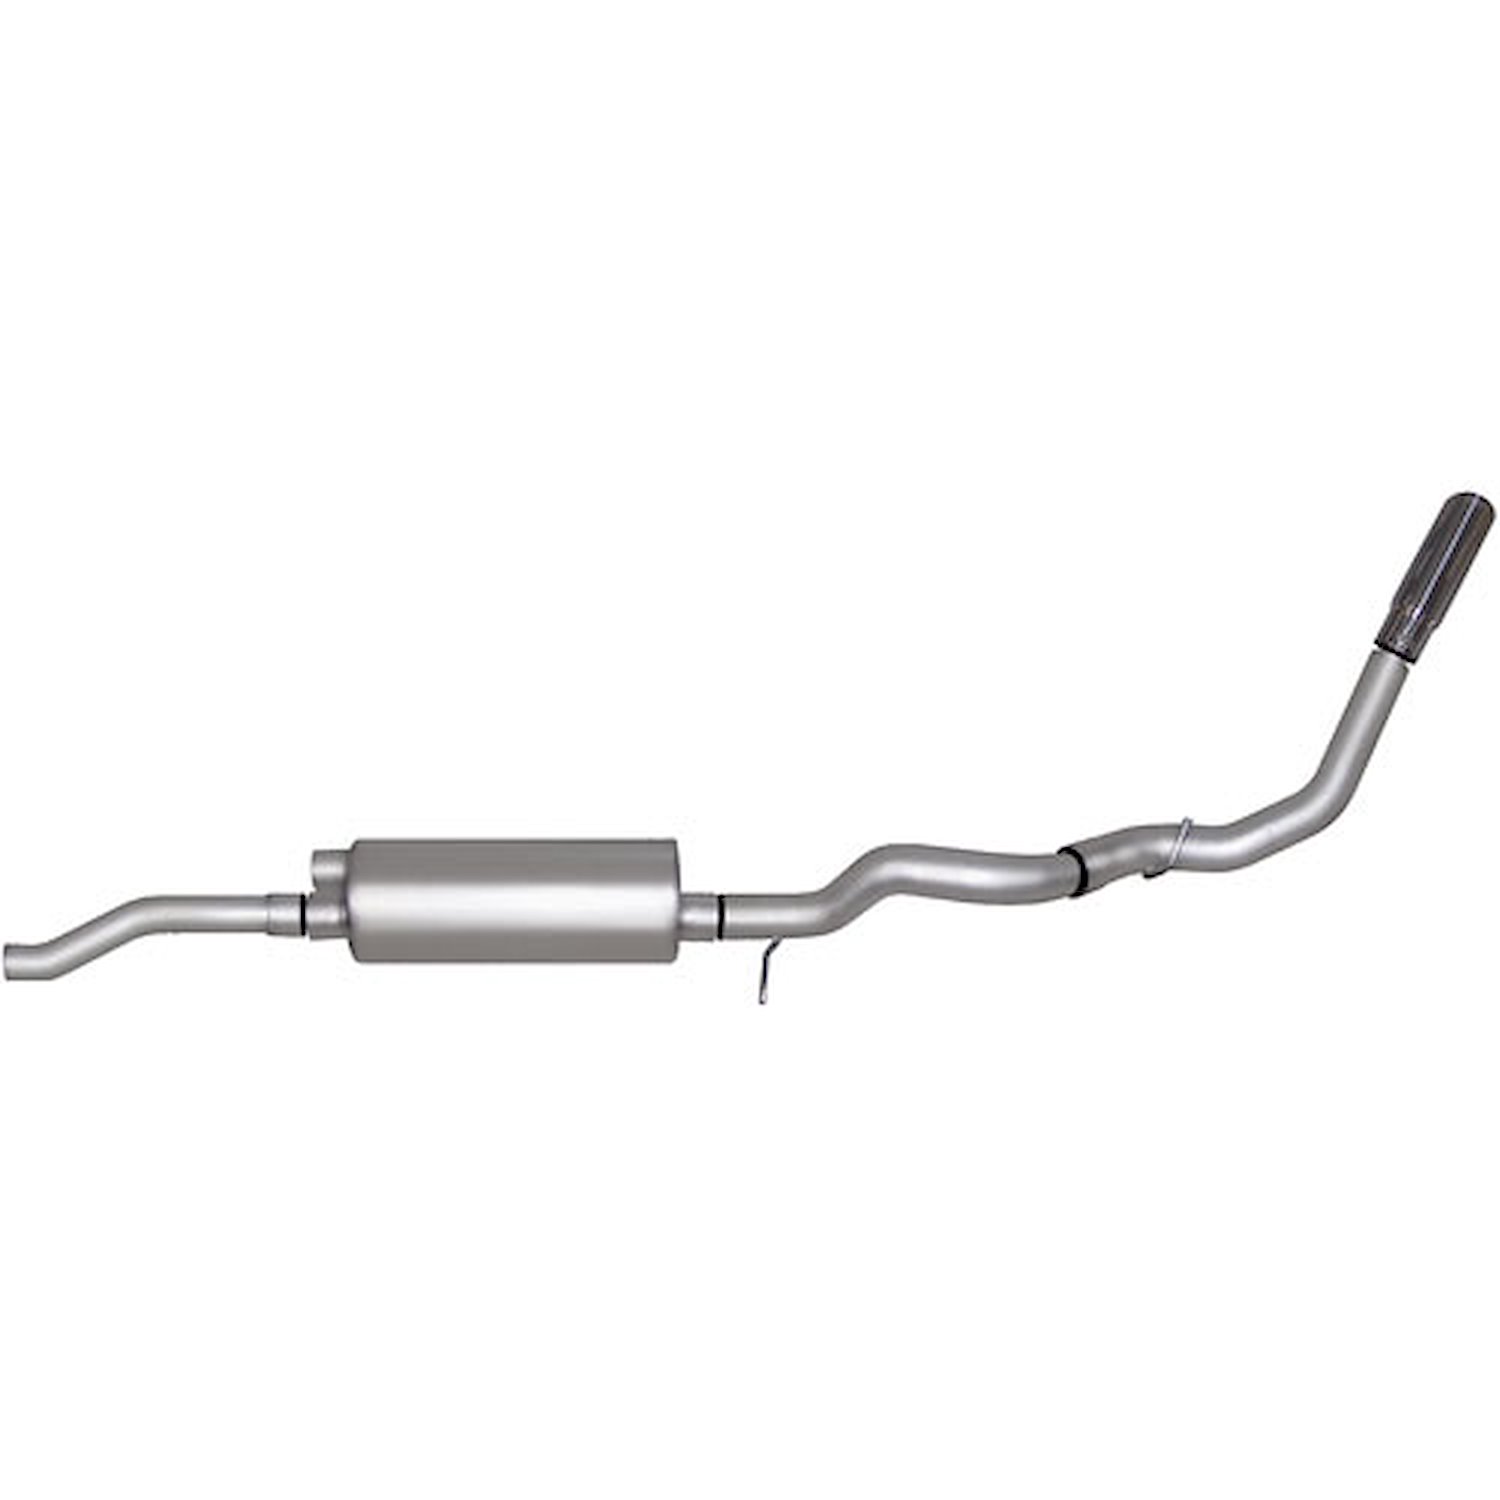 Swept-Side Aluminized Steel Cat-Back Exhaust 2000-06 Chevy